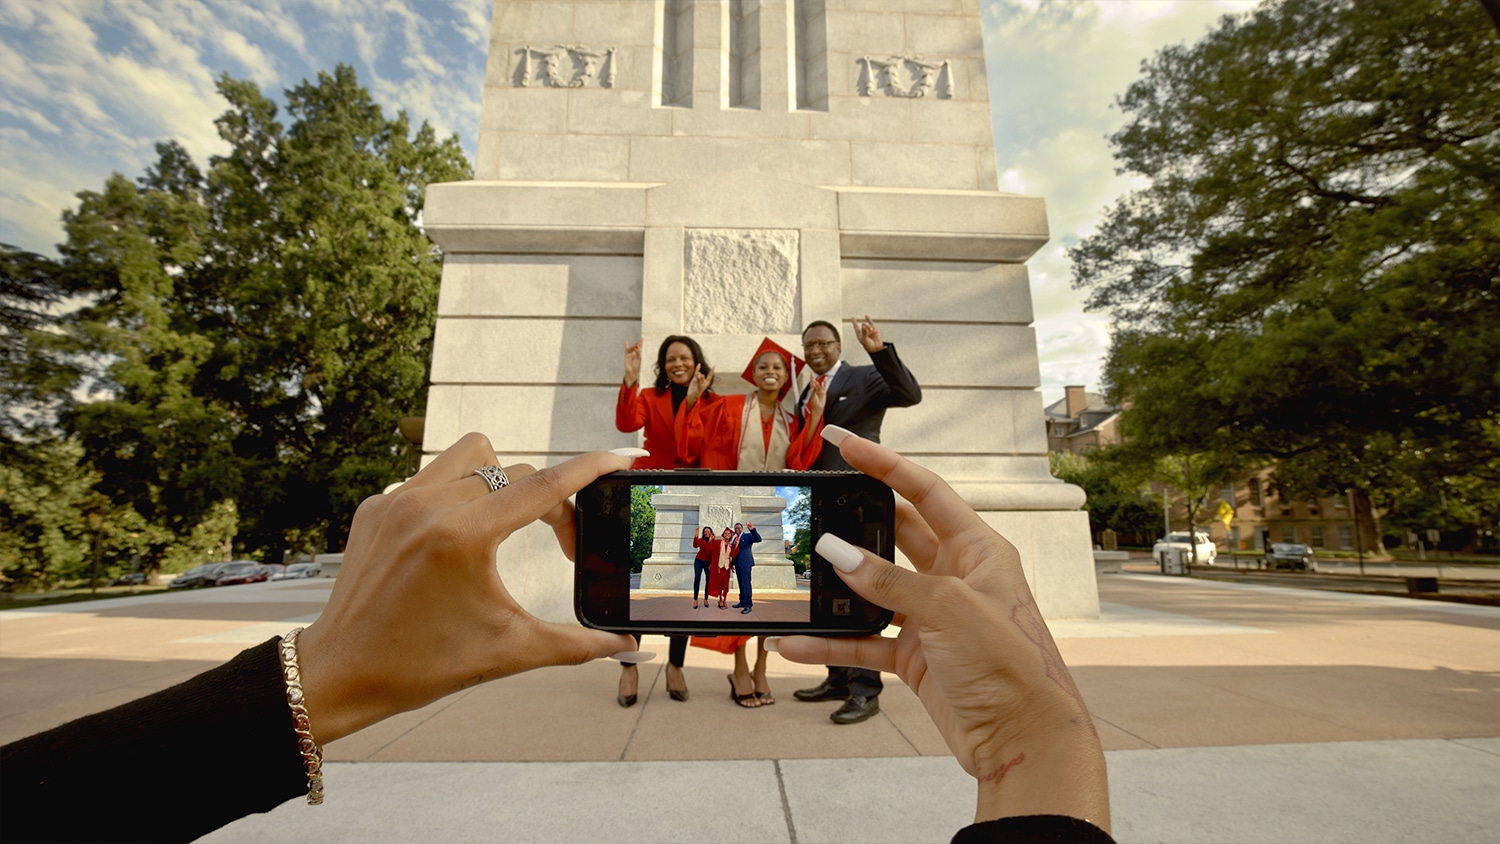 A proud NC State graduate has her picture taken with her family in front of the Memorial Belltower.